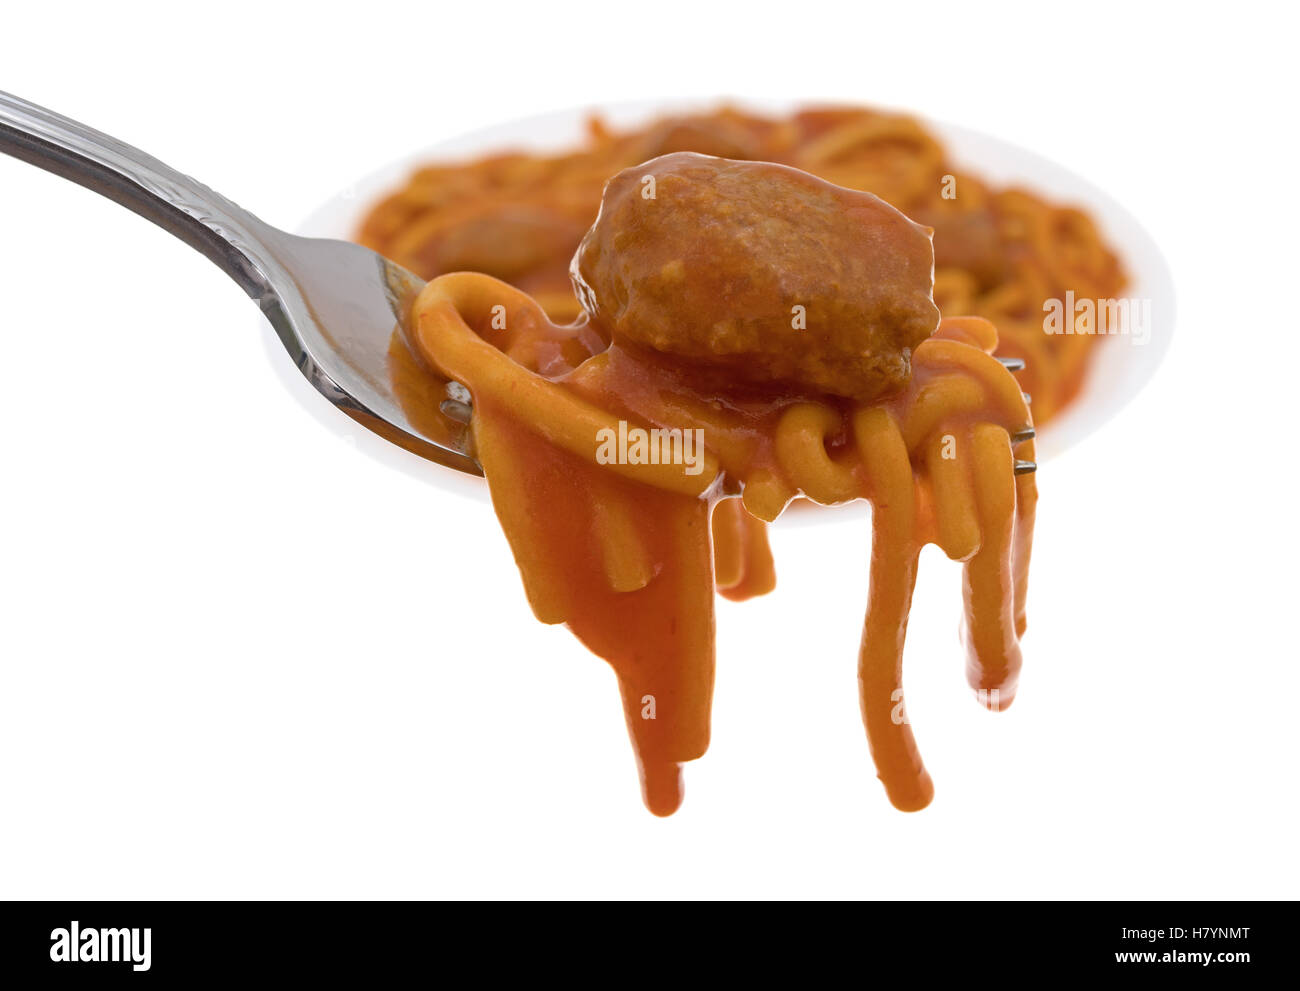 Side view of a meatball atop spaghetti on a fork in the foreground with a plate of food in the background. Stock Photo